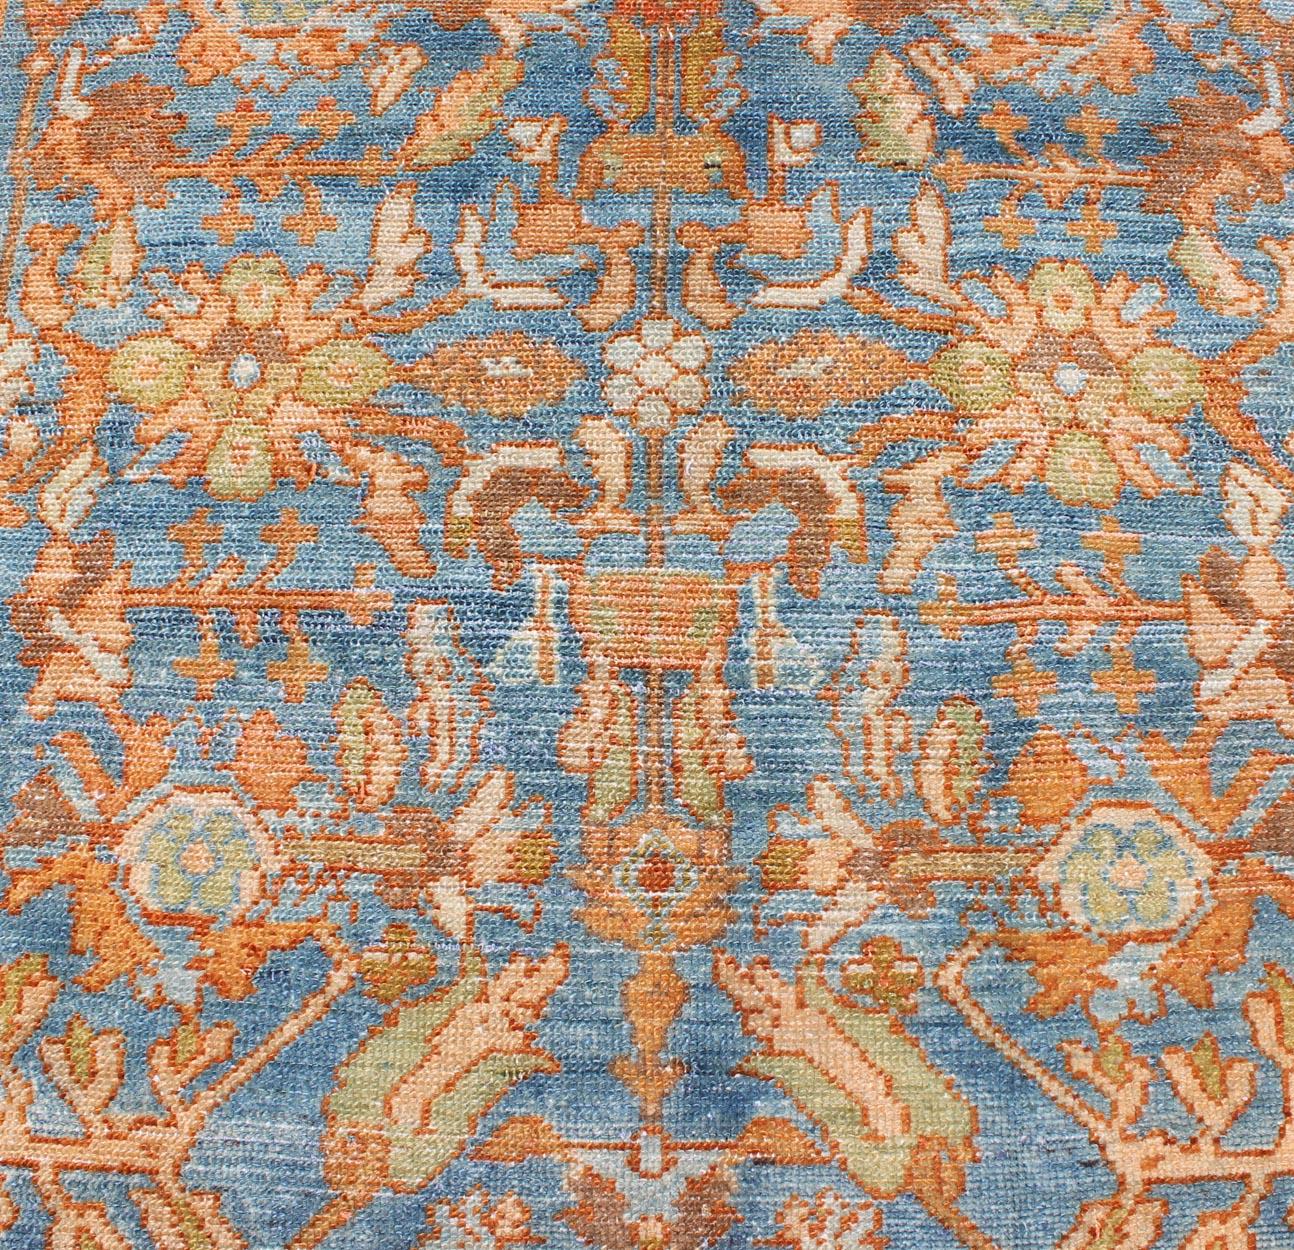 Wool Vibrant Antique Persian Malayer Rug in Shades of Rust, Orange, and Blue For Sale